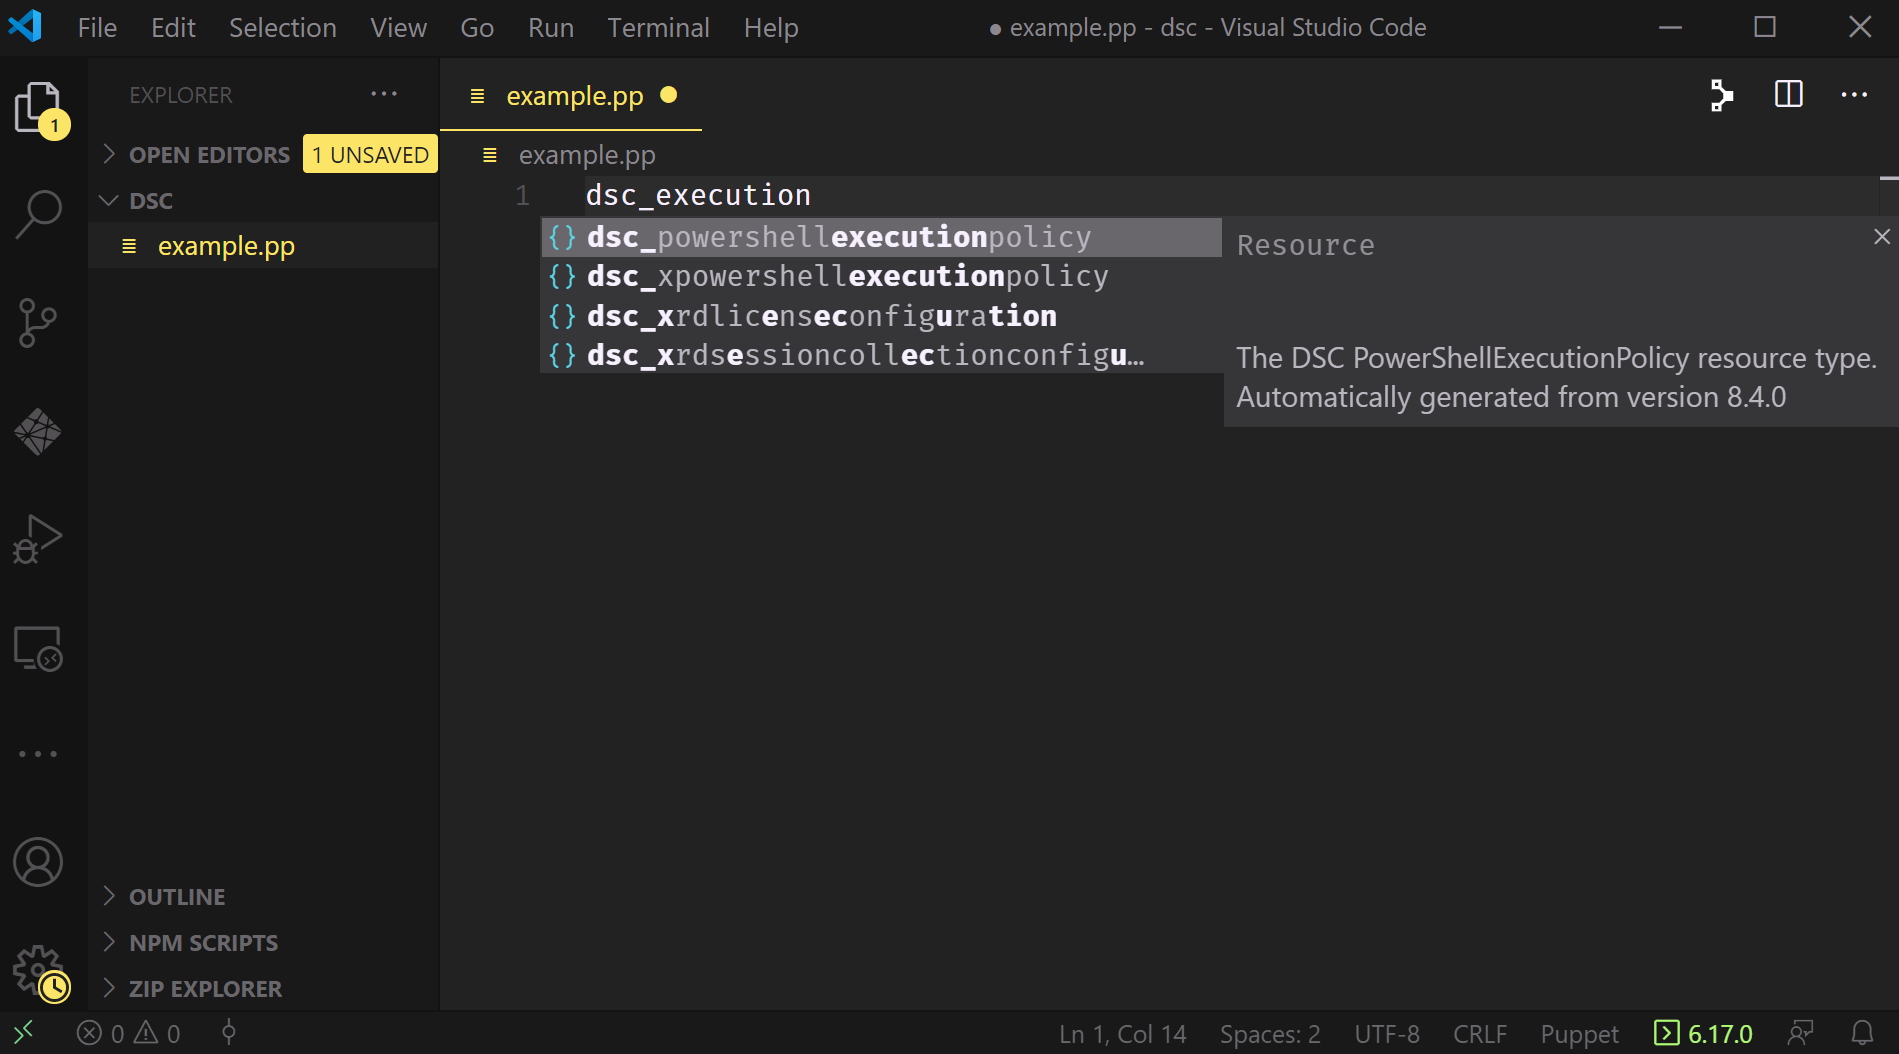 A VSCode window showing the text ‘dsc_execution’ has raised a tooltip which lists multiple possible matches, including dsc_powershellexecutionpolicy, and to the right it shows the help information for this resource.